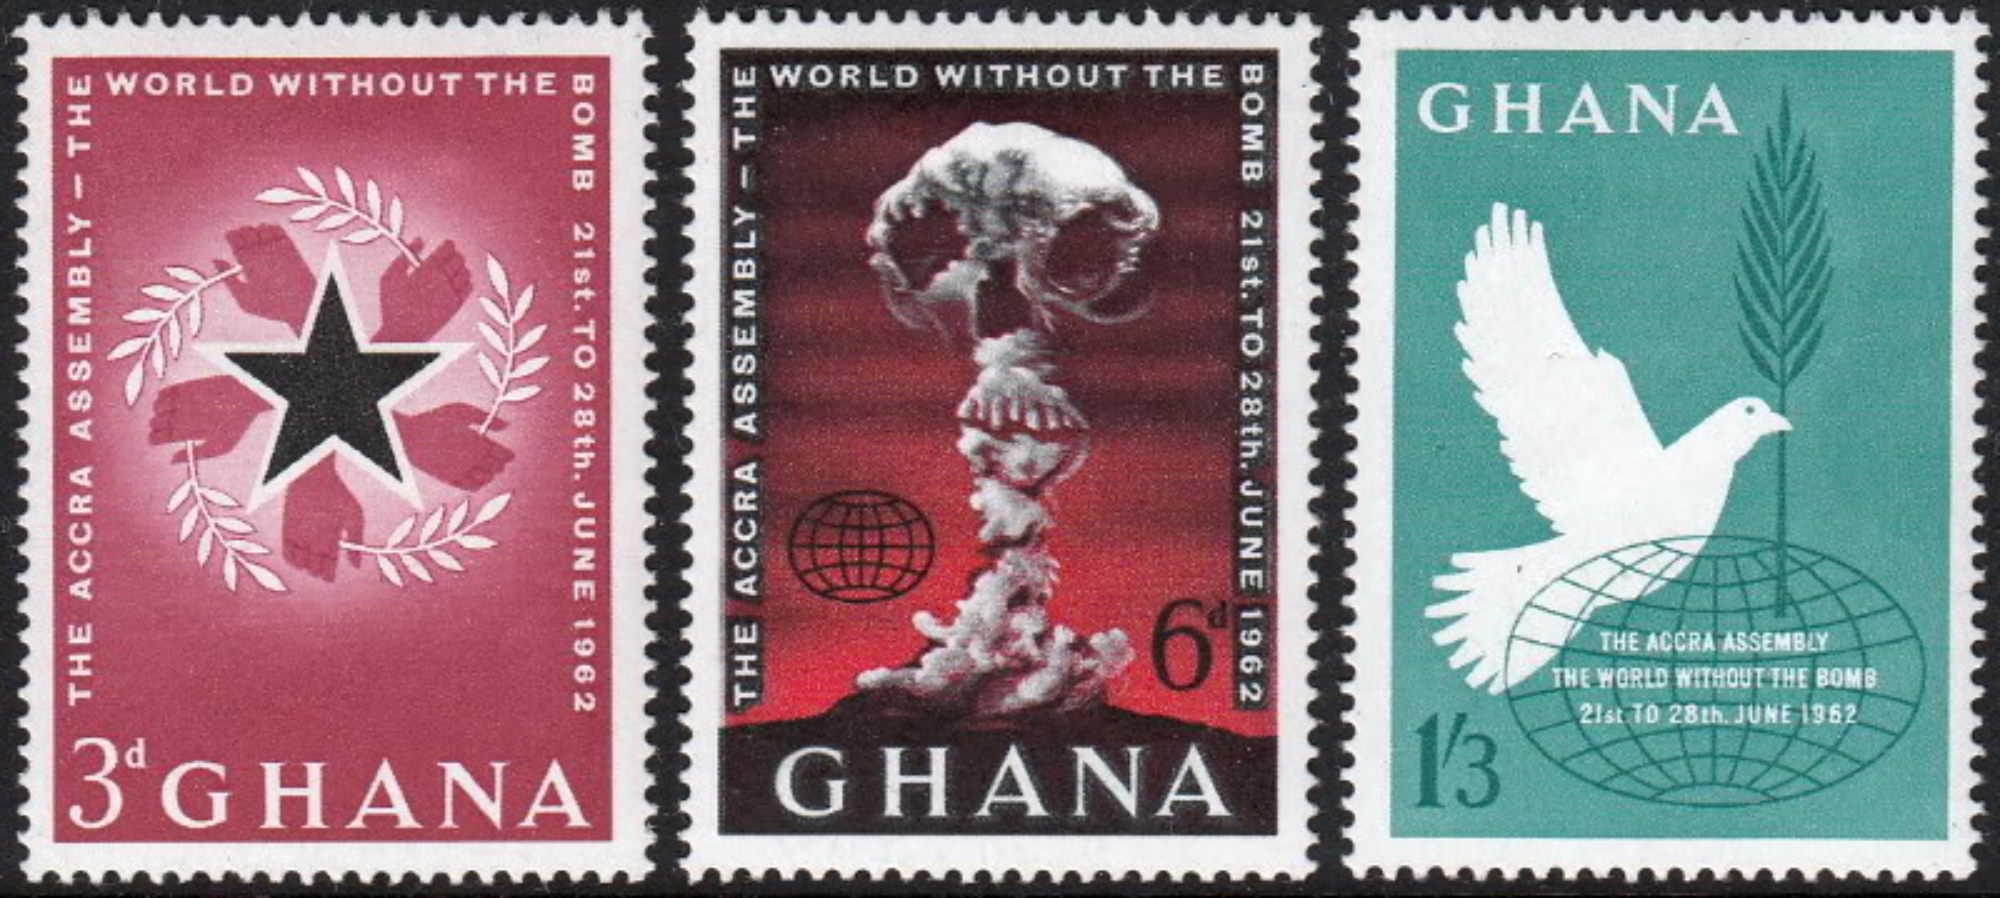 Stamps issued to mark the Accra Assembly on nuclear disarmament, "The World Without the Bomb", convened in  Accra, Ghana on June 1962. Source: stampboards.com.